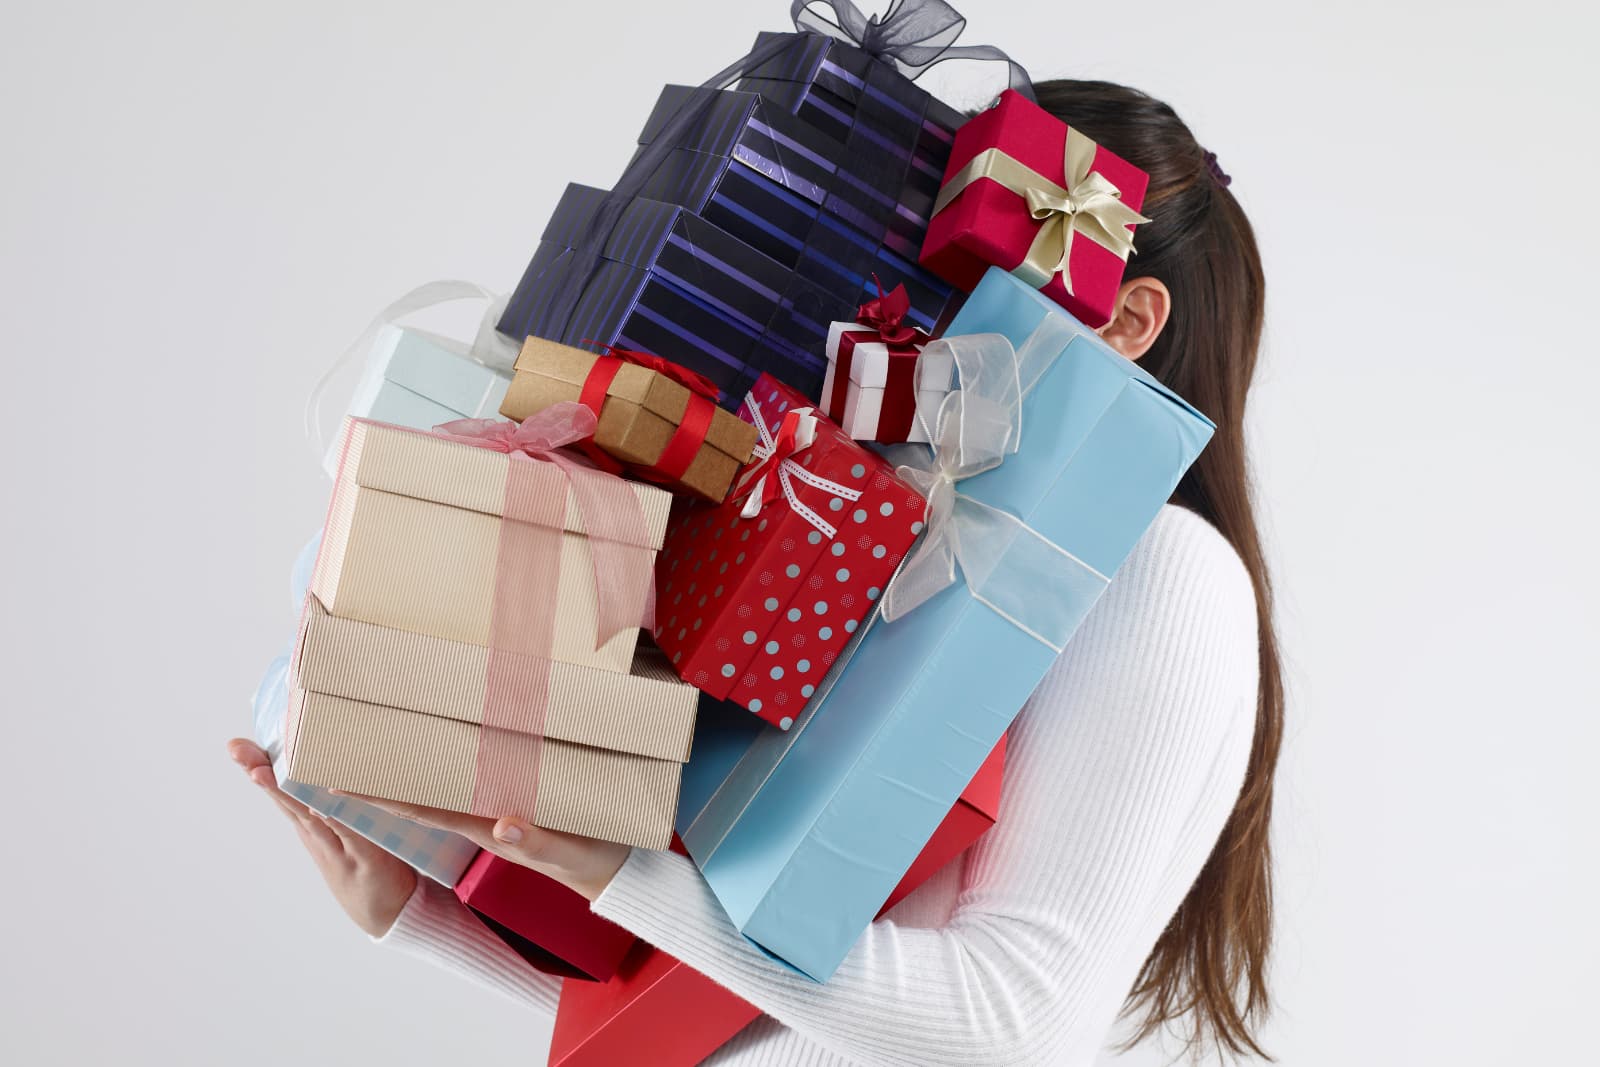 Teenage girl with long dark hair and long sleeve white sweater is balancing a large pile of gifts in her arms. Gifts are varied colors of boxes and bows.